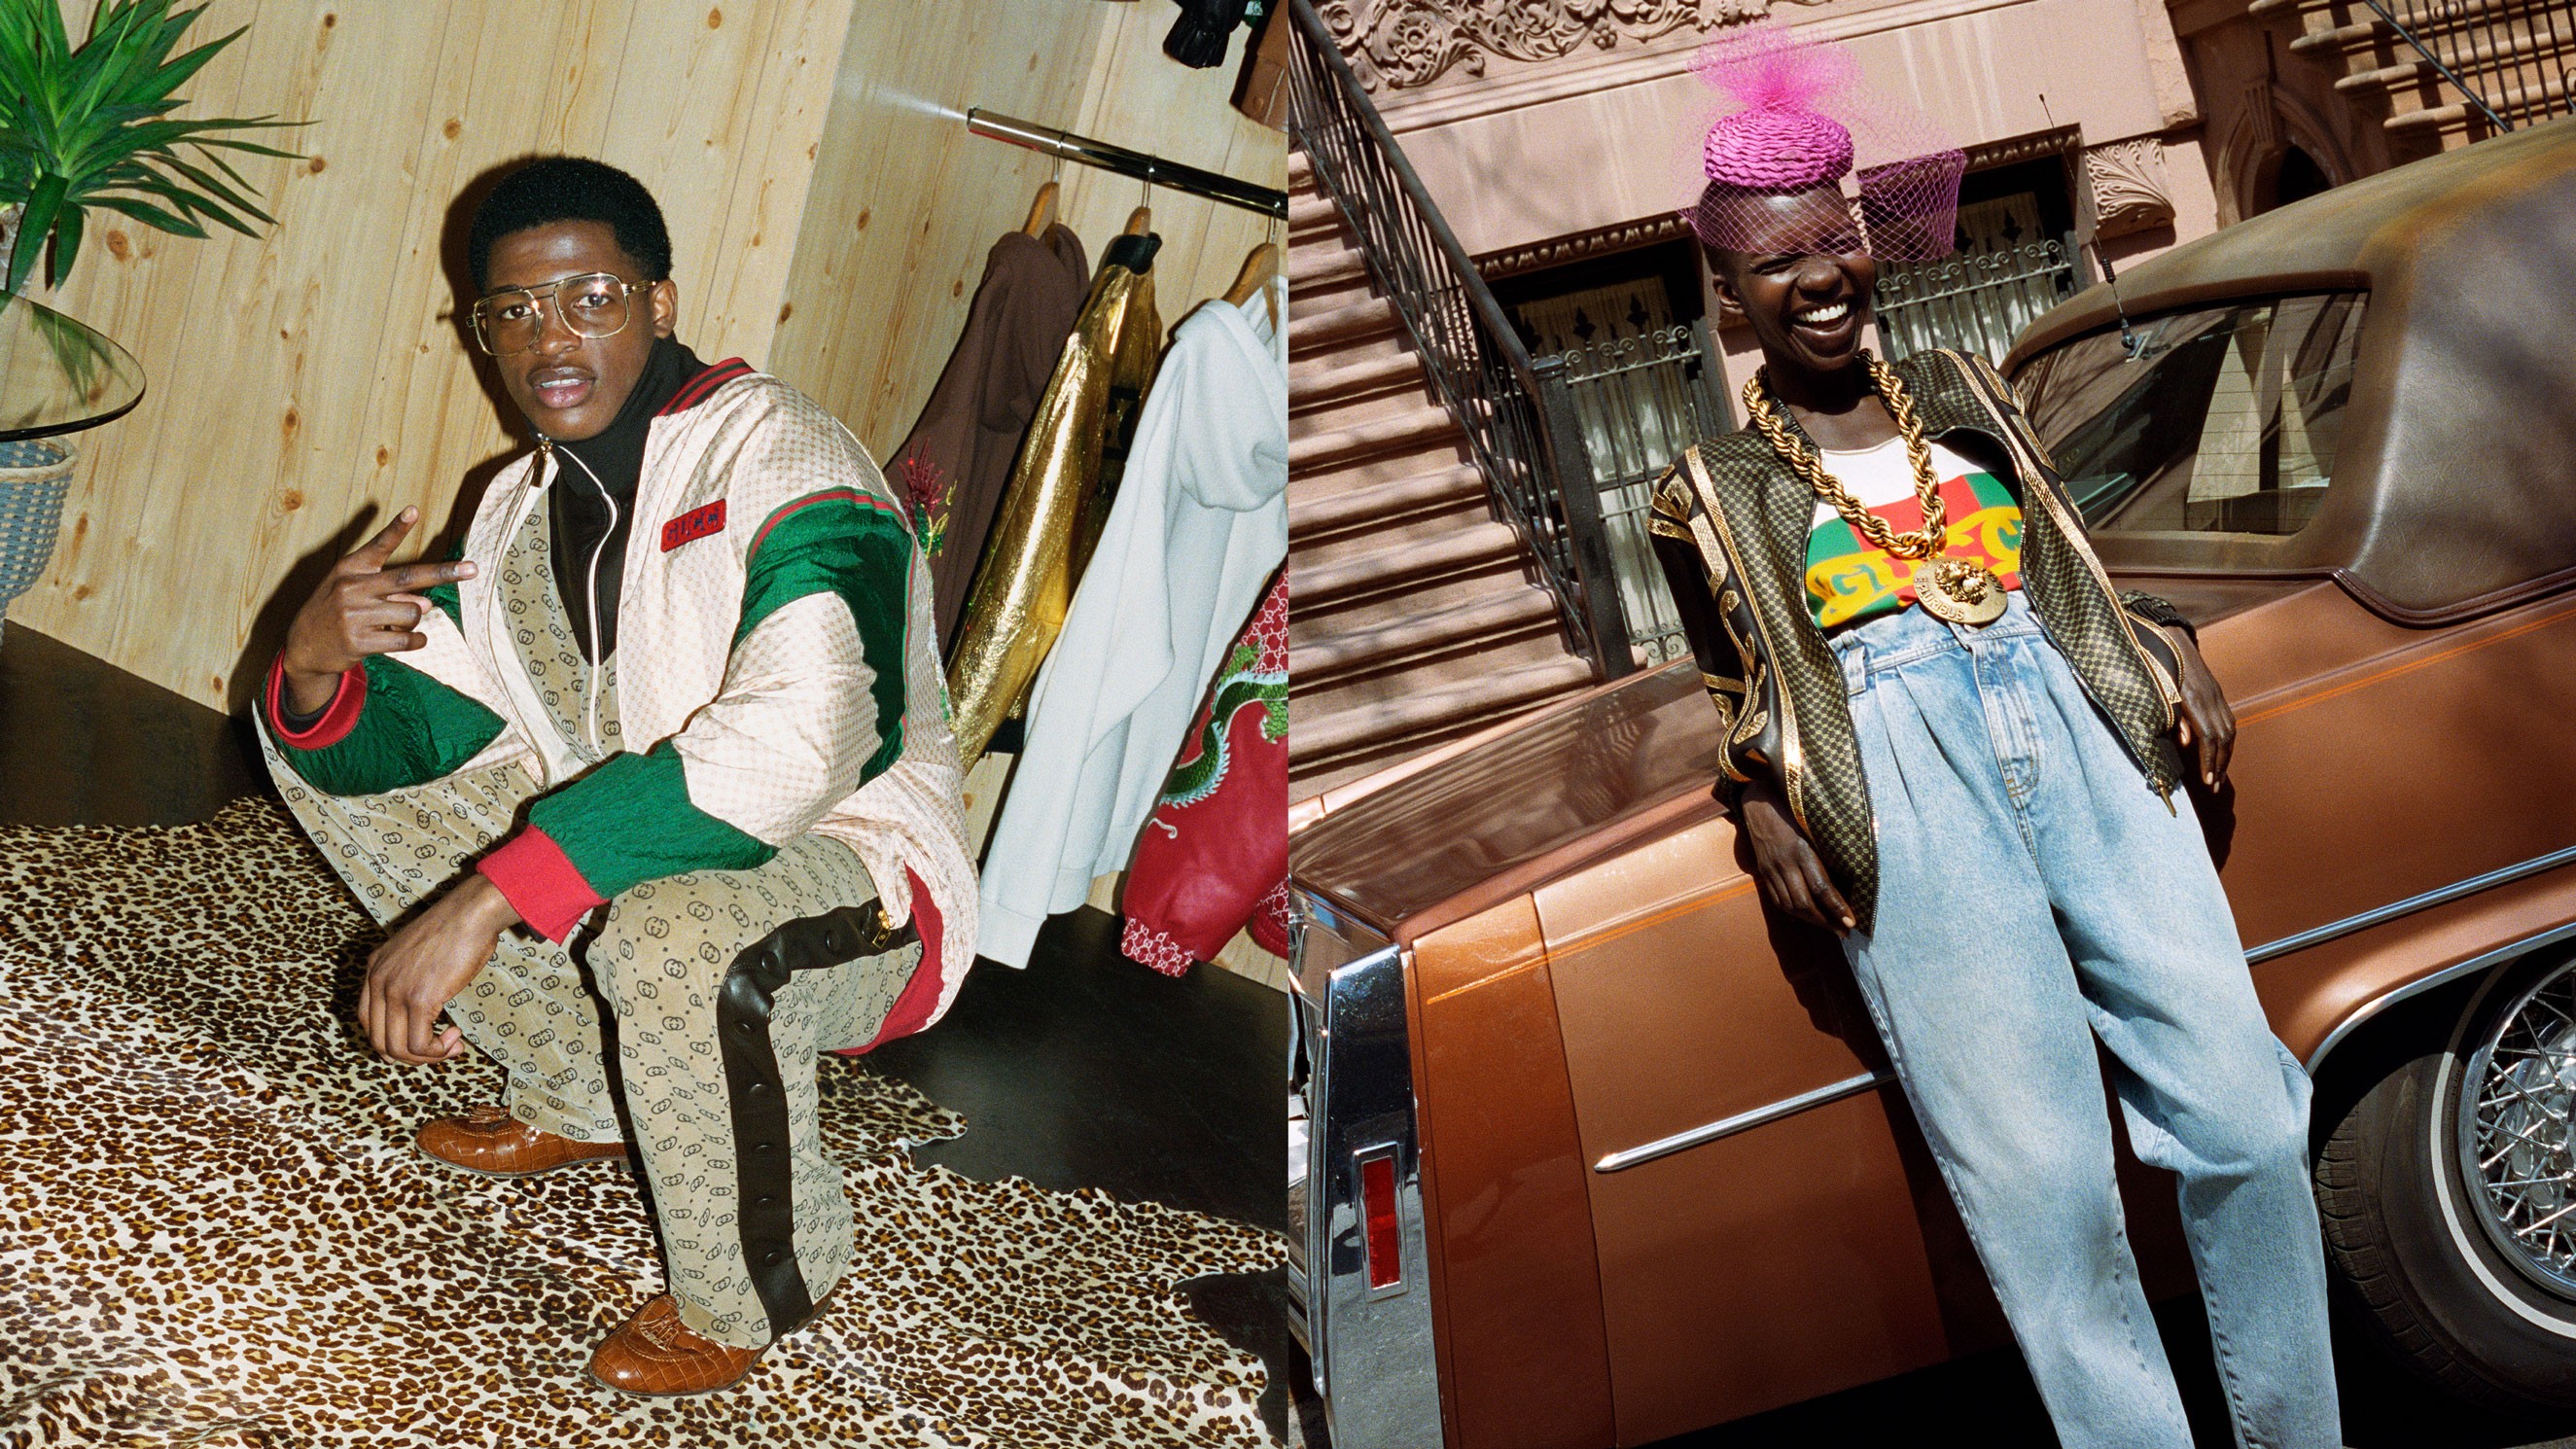 Gucci and Dapper Dan have dropped their first collection - ICON